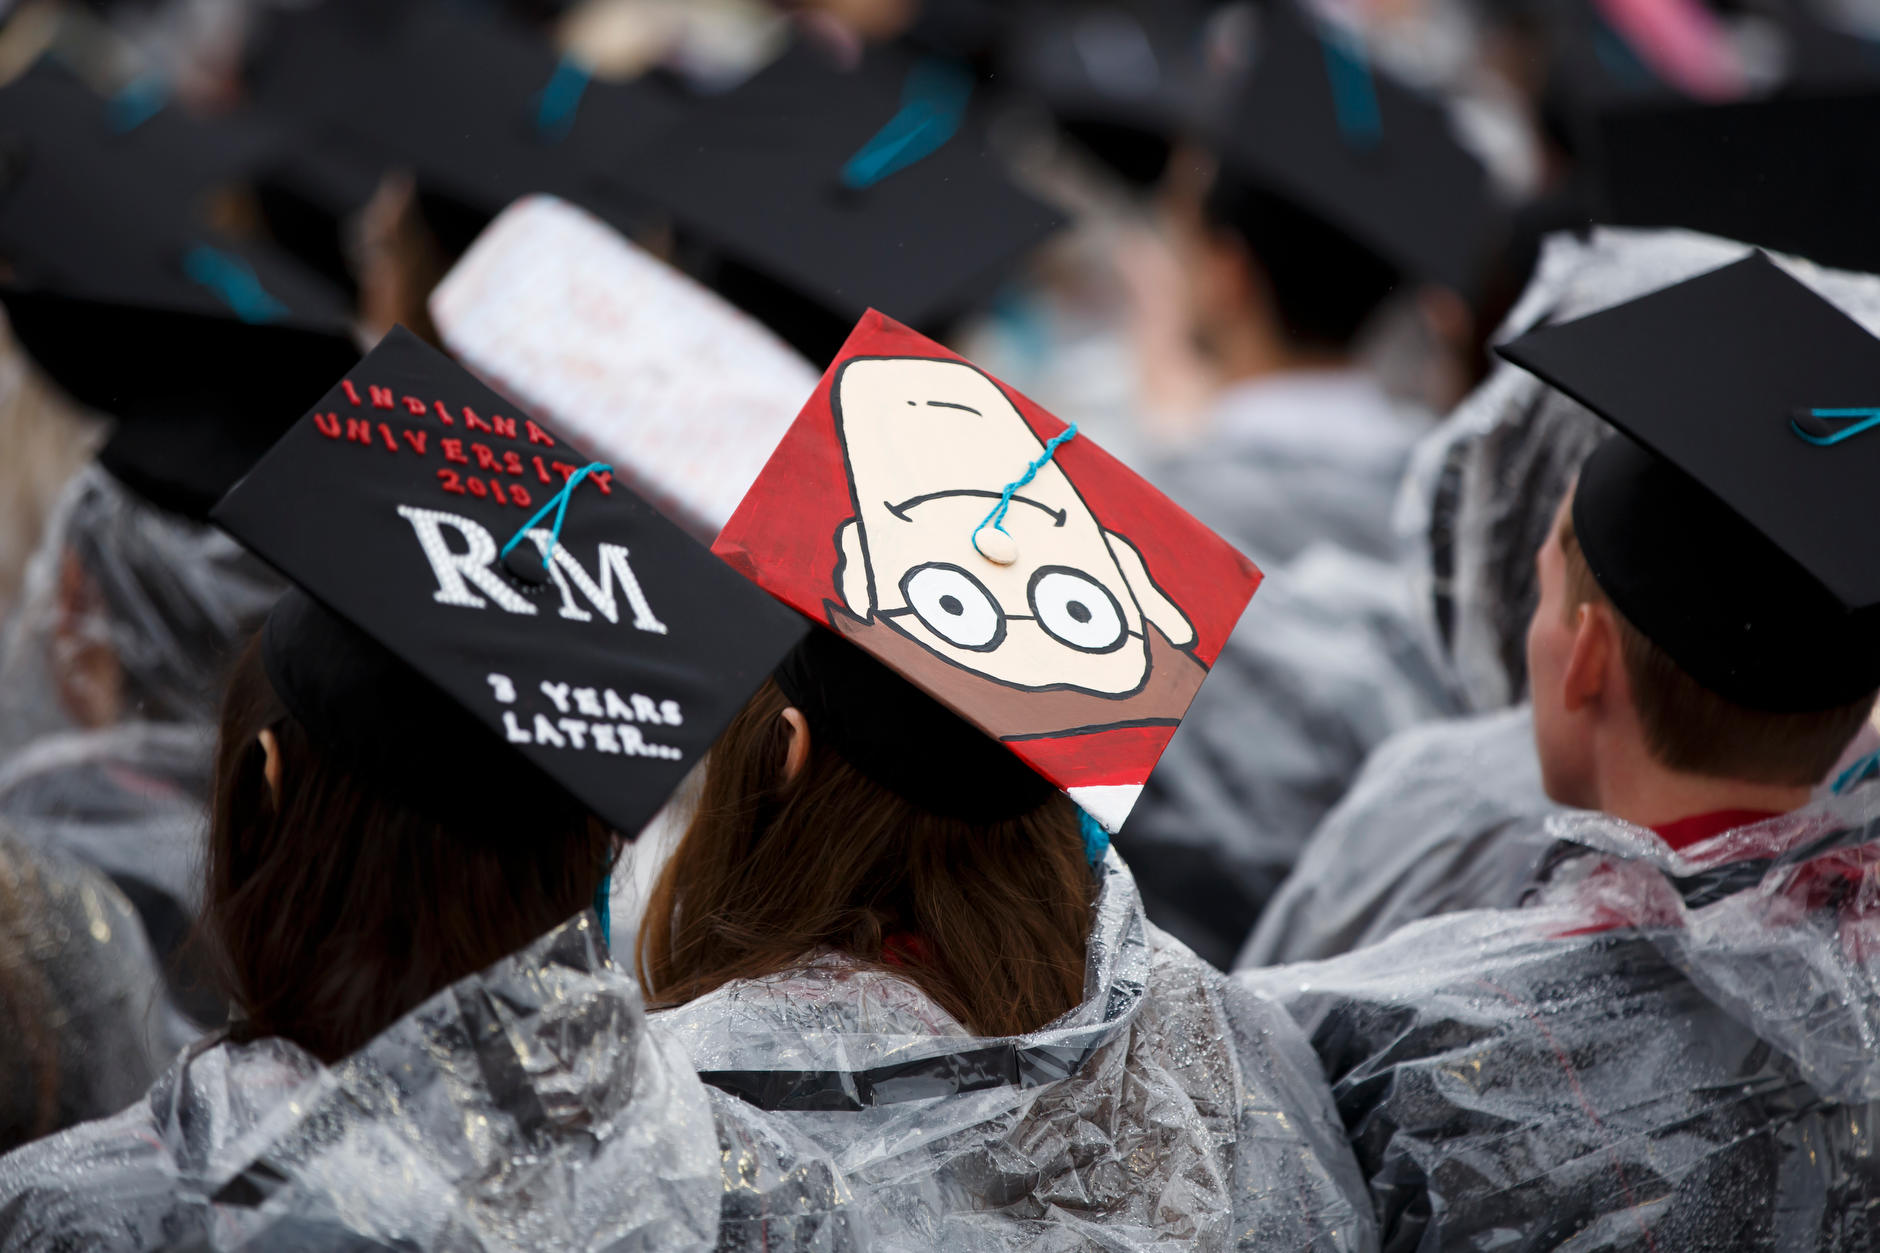 A graduate wears a mortarboard decorated with the character Waldo during the Indiana University Bloomington Undergraduate Commencement at Memorial Stadium on Saturday, May 4, 2019. (James Brosher/Indiana University)